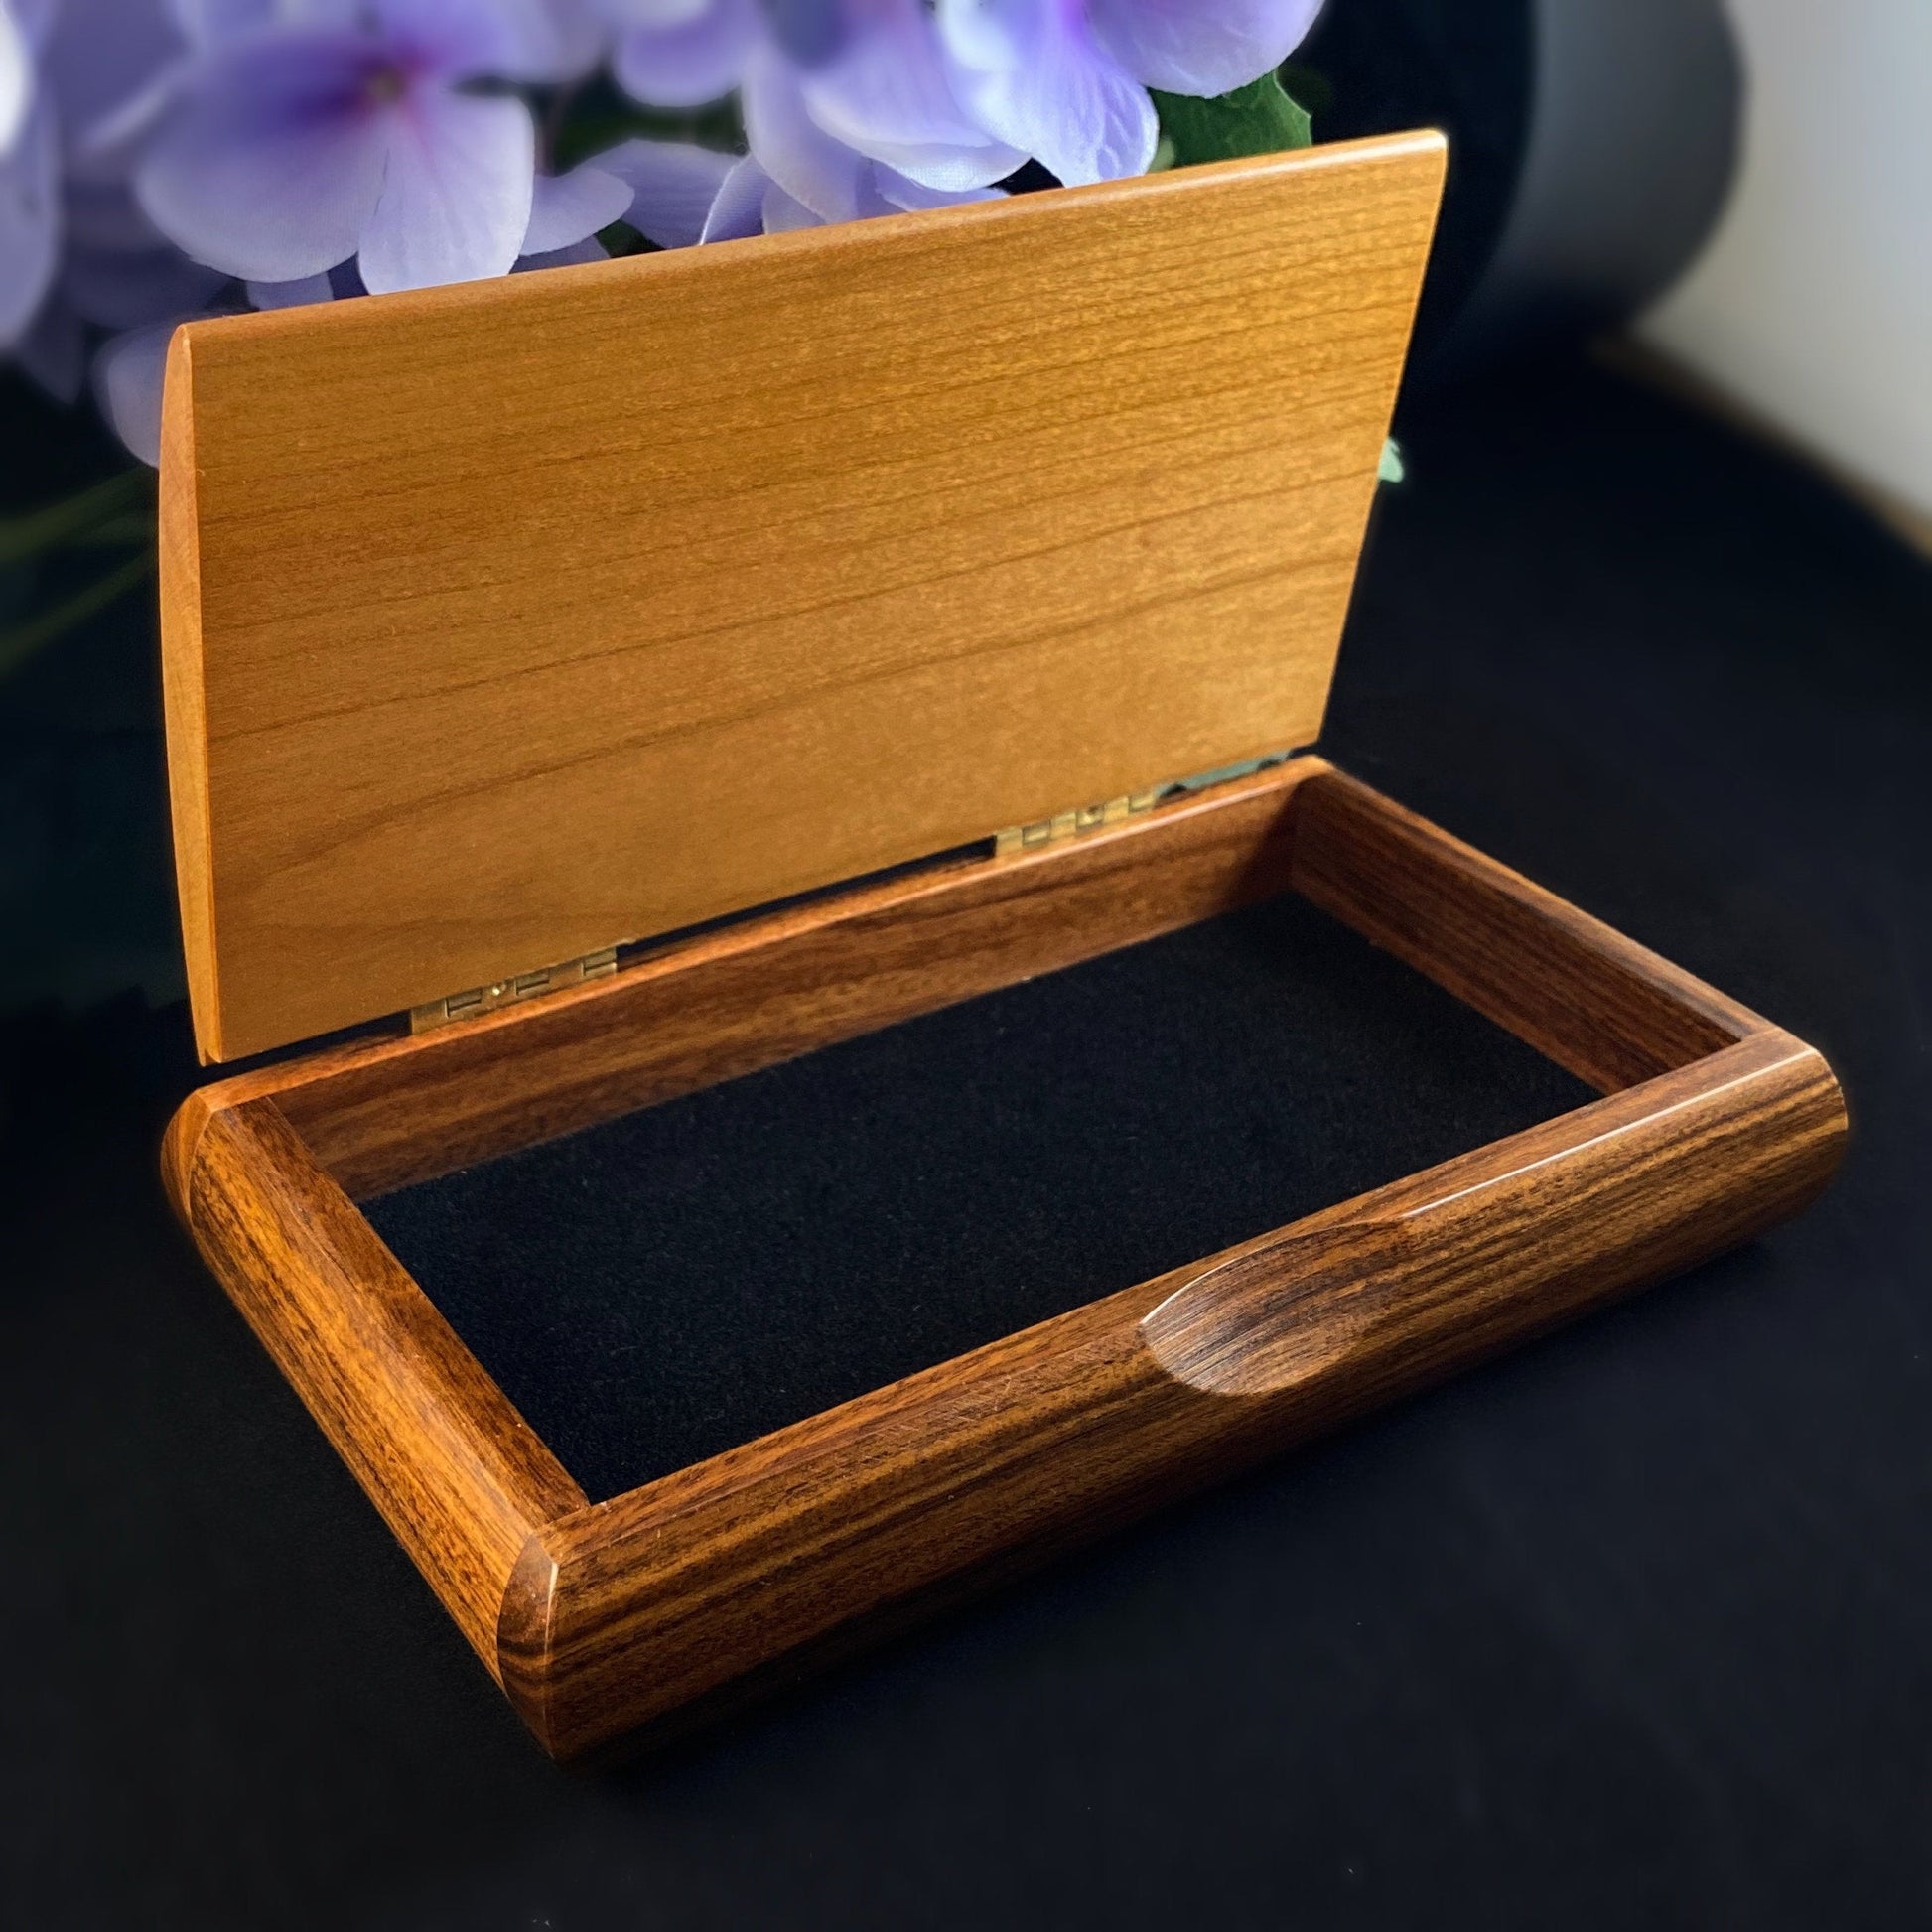 Along Comes Today Quote Box, Handmade Wooden Box with Cherry and Bolivian Rosewood, Made in USA